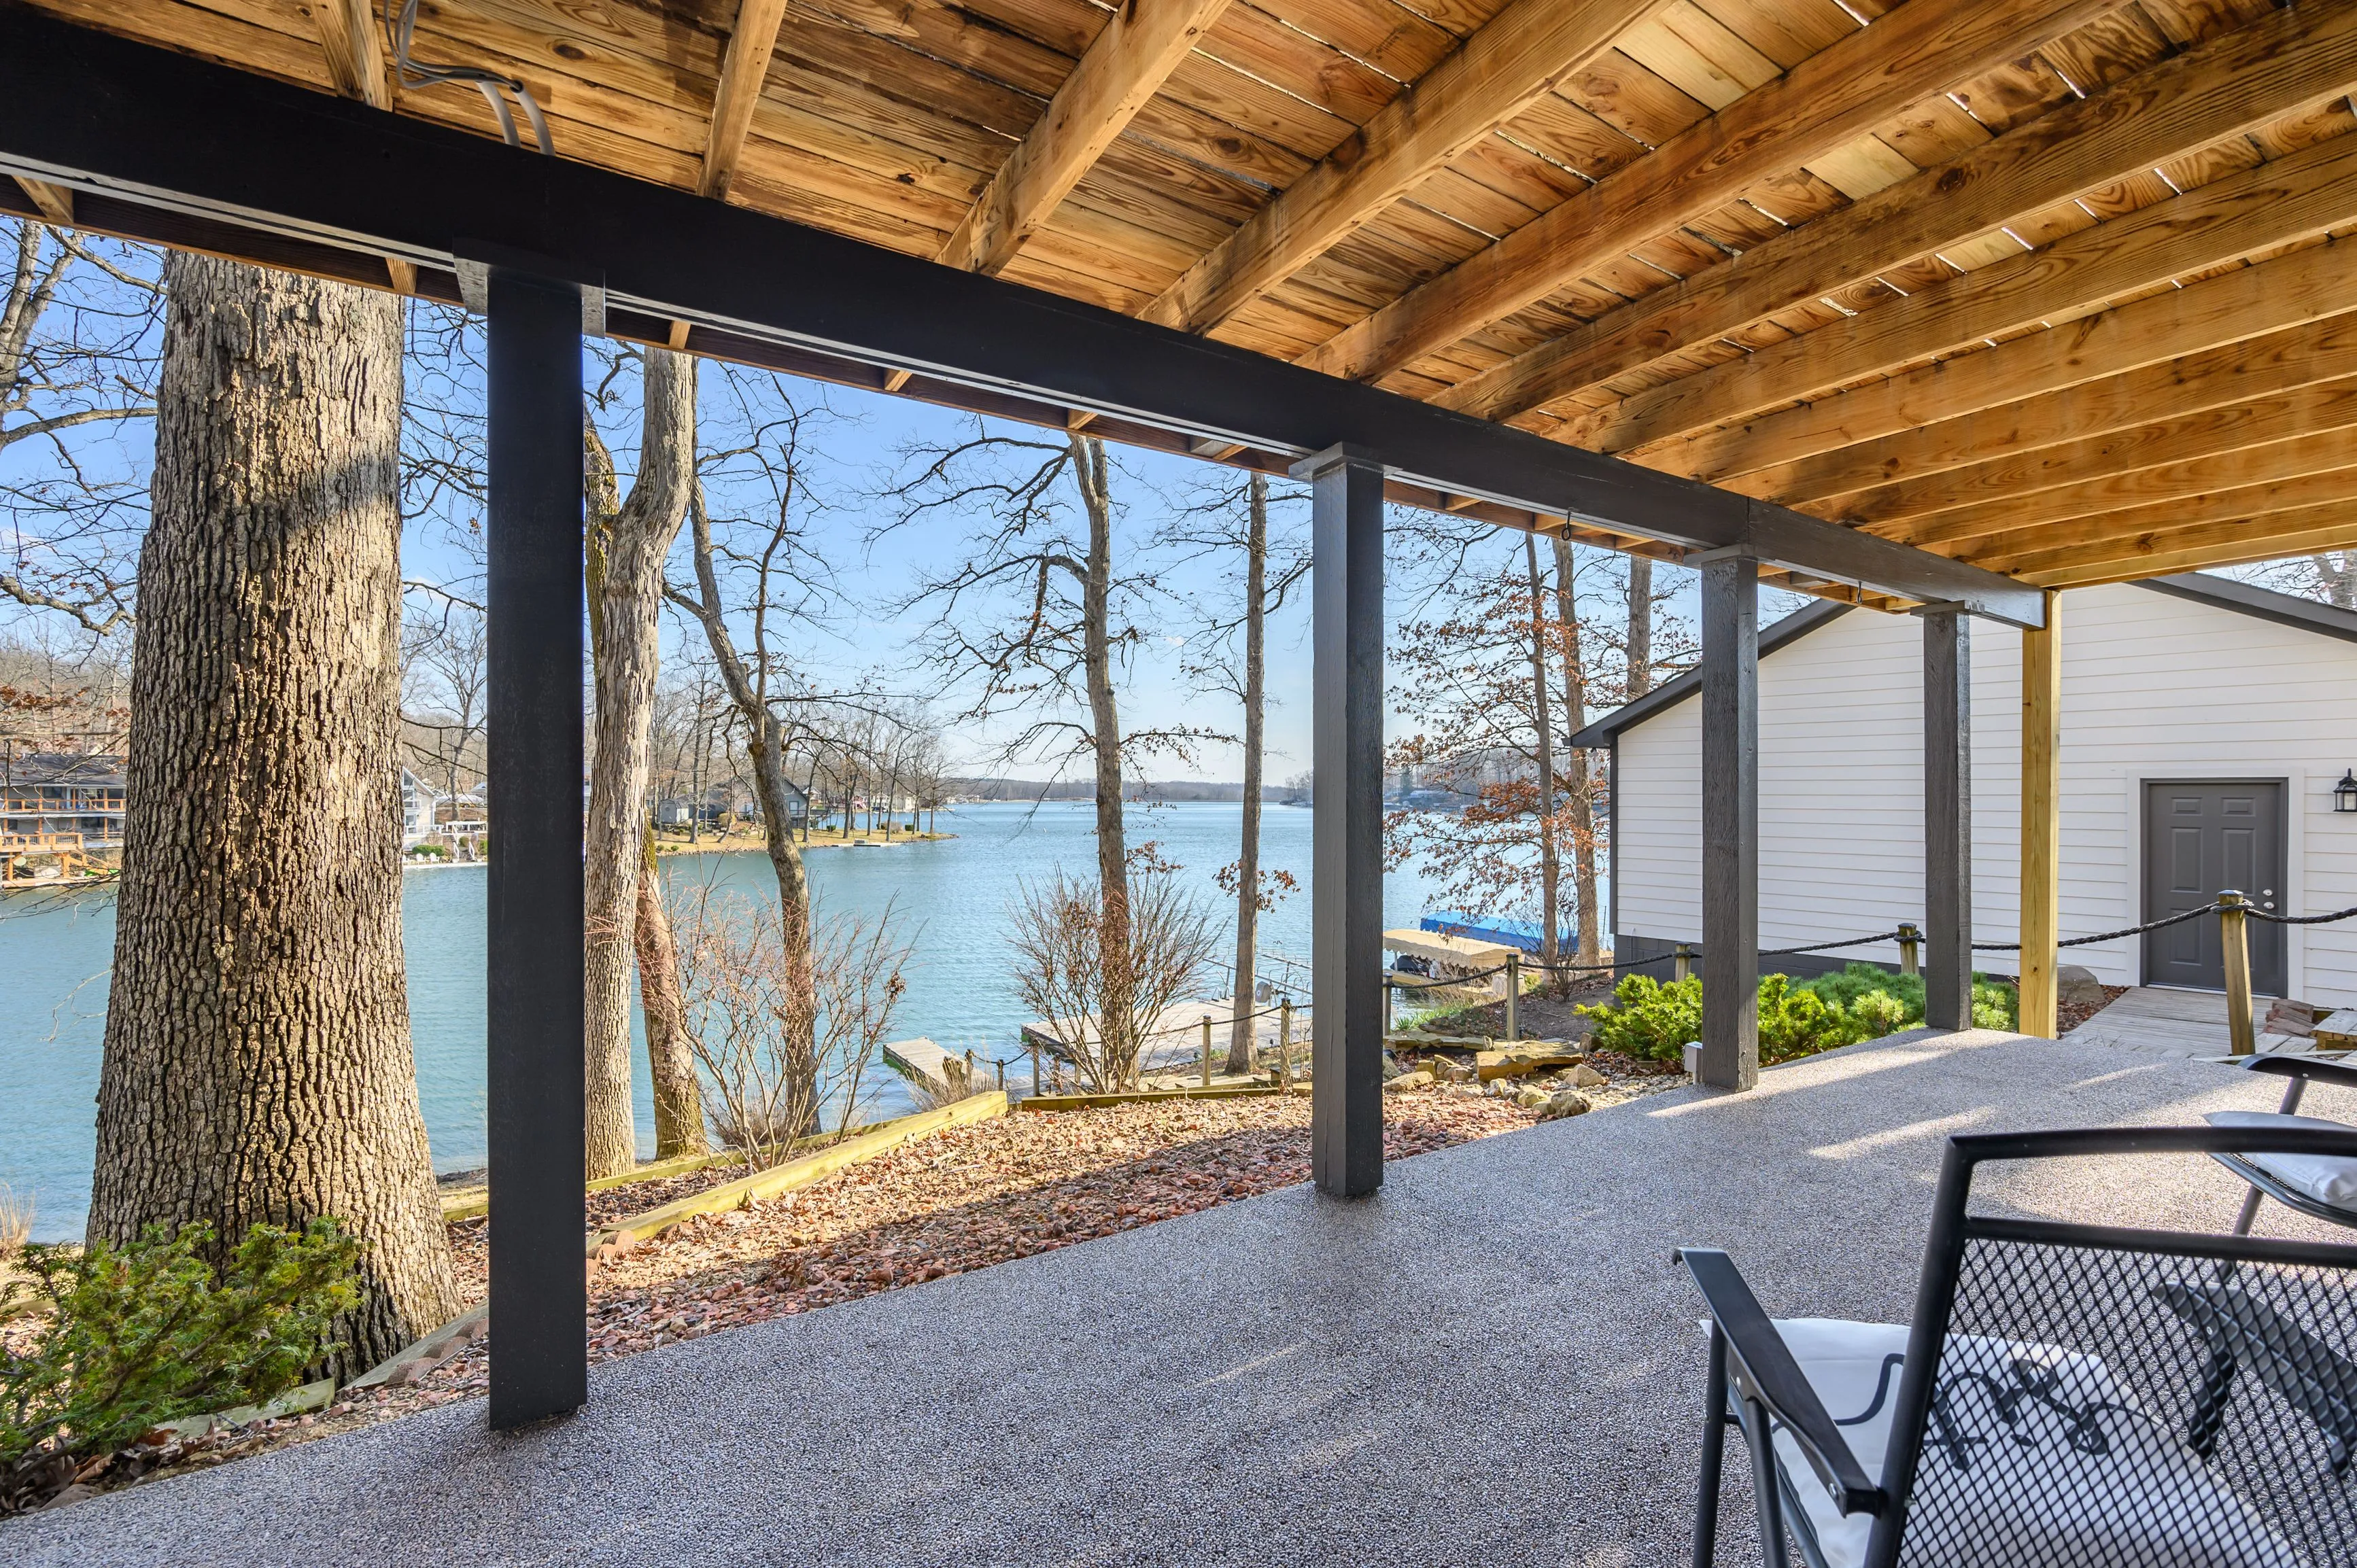 "View from a covered patio overlooking a tranquil lake with trees and clear skies, featuring outdoor furniture and wooden beams"